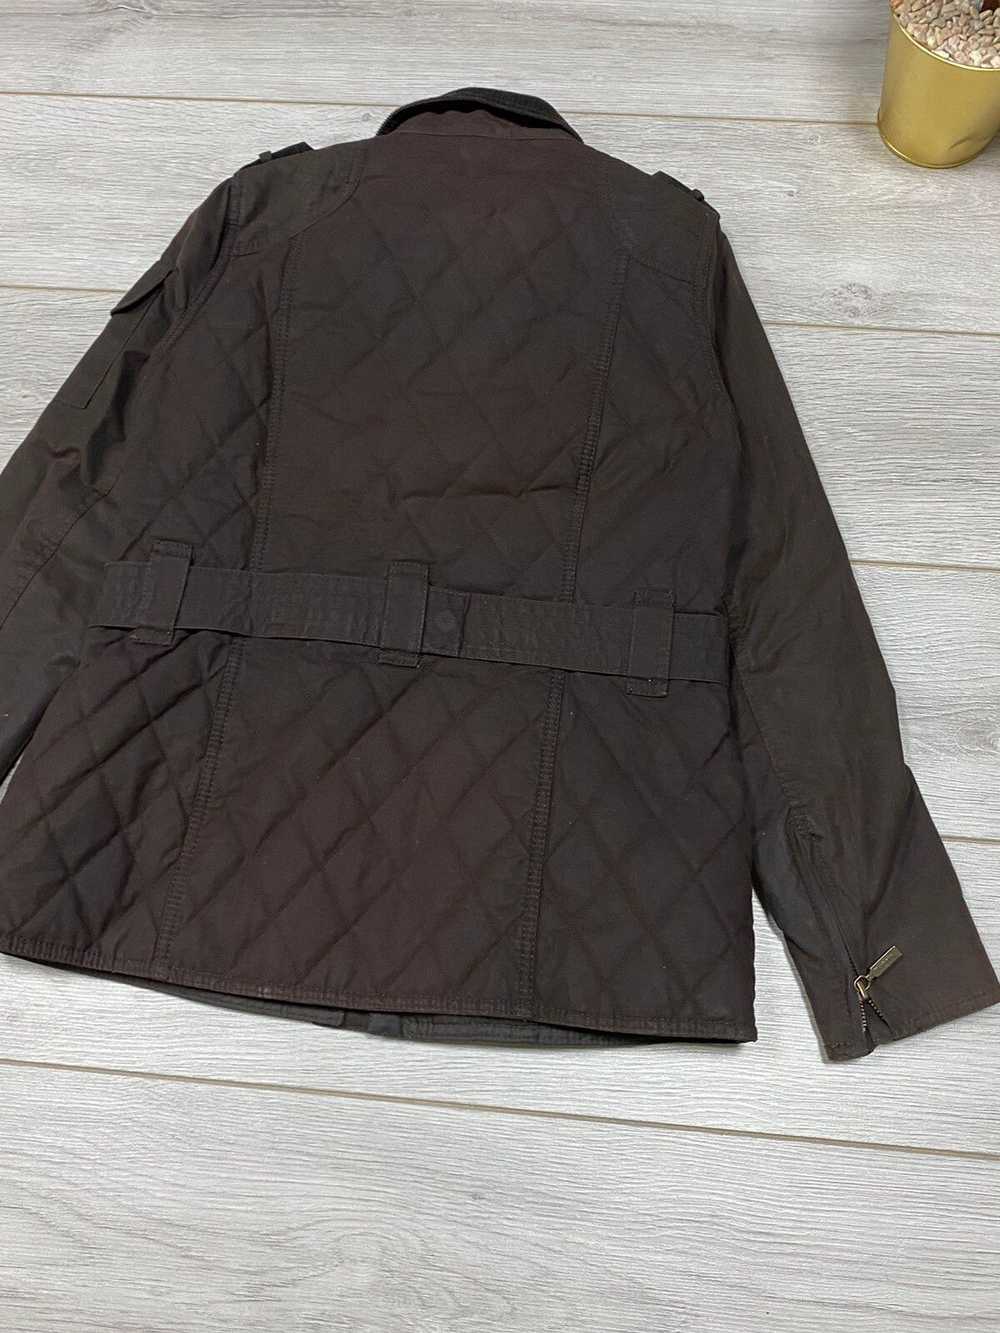 Barbour Barbour waxed international quilted jacke… - image 8